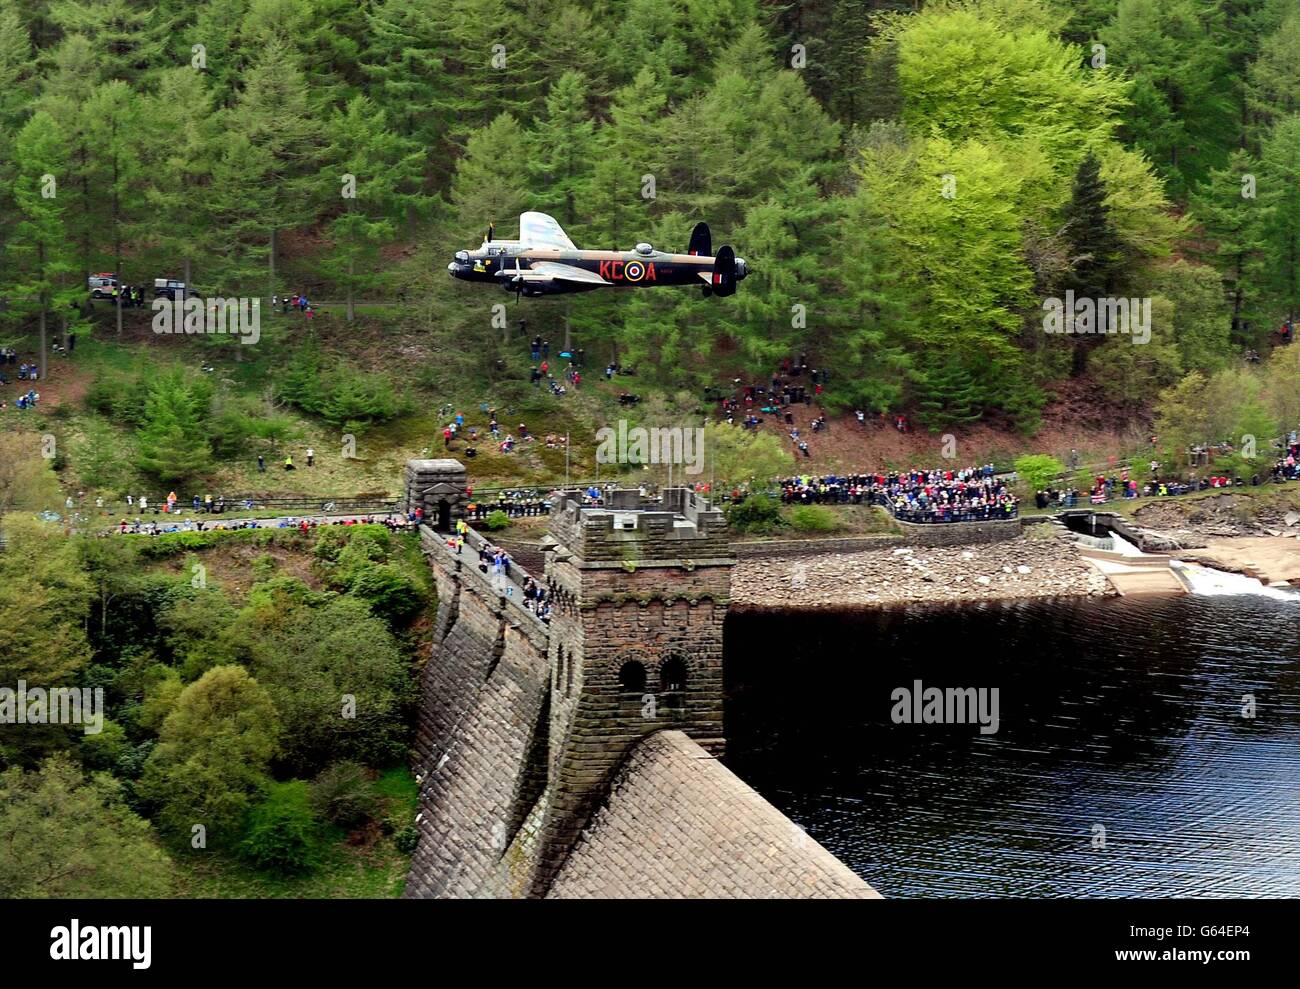 A Lancaster bomber during the Battle of Britain Memorial Flight performs a flypast over the Derwent Reservoir as part of a series of events to commemorate 70th anniversary of the Dambusters raid. Stock Photo